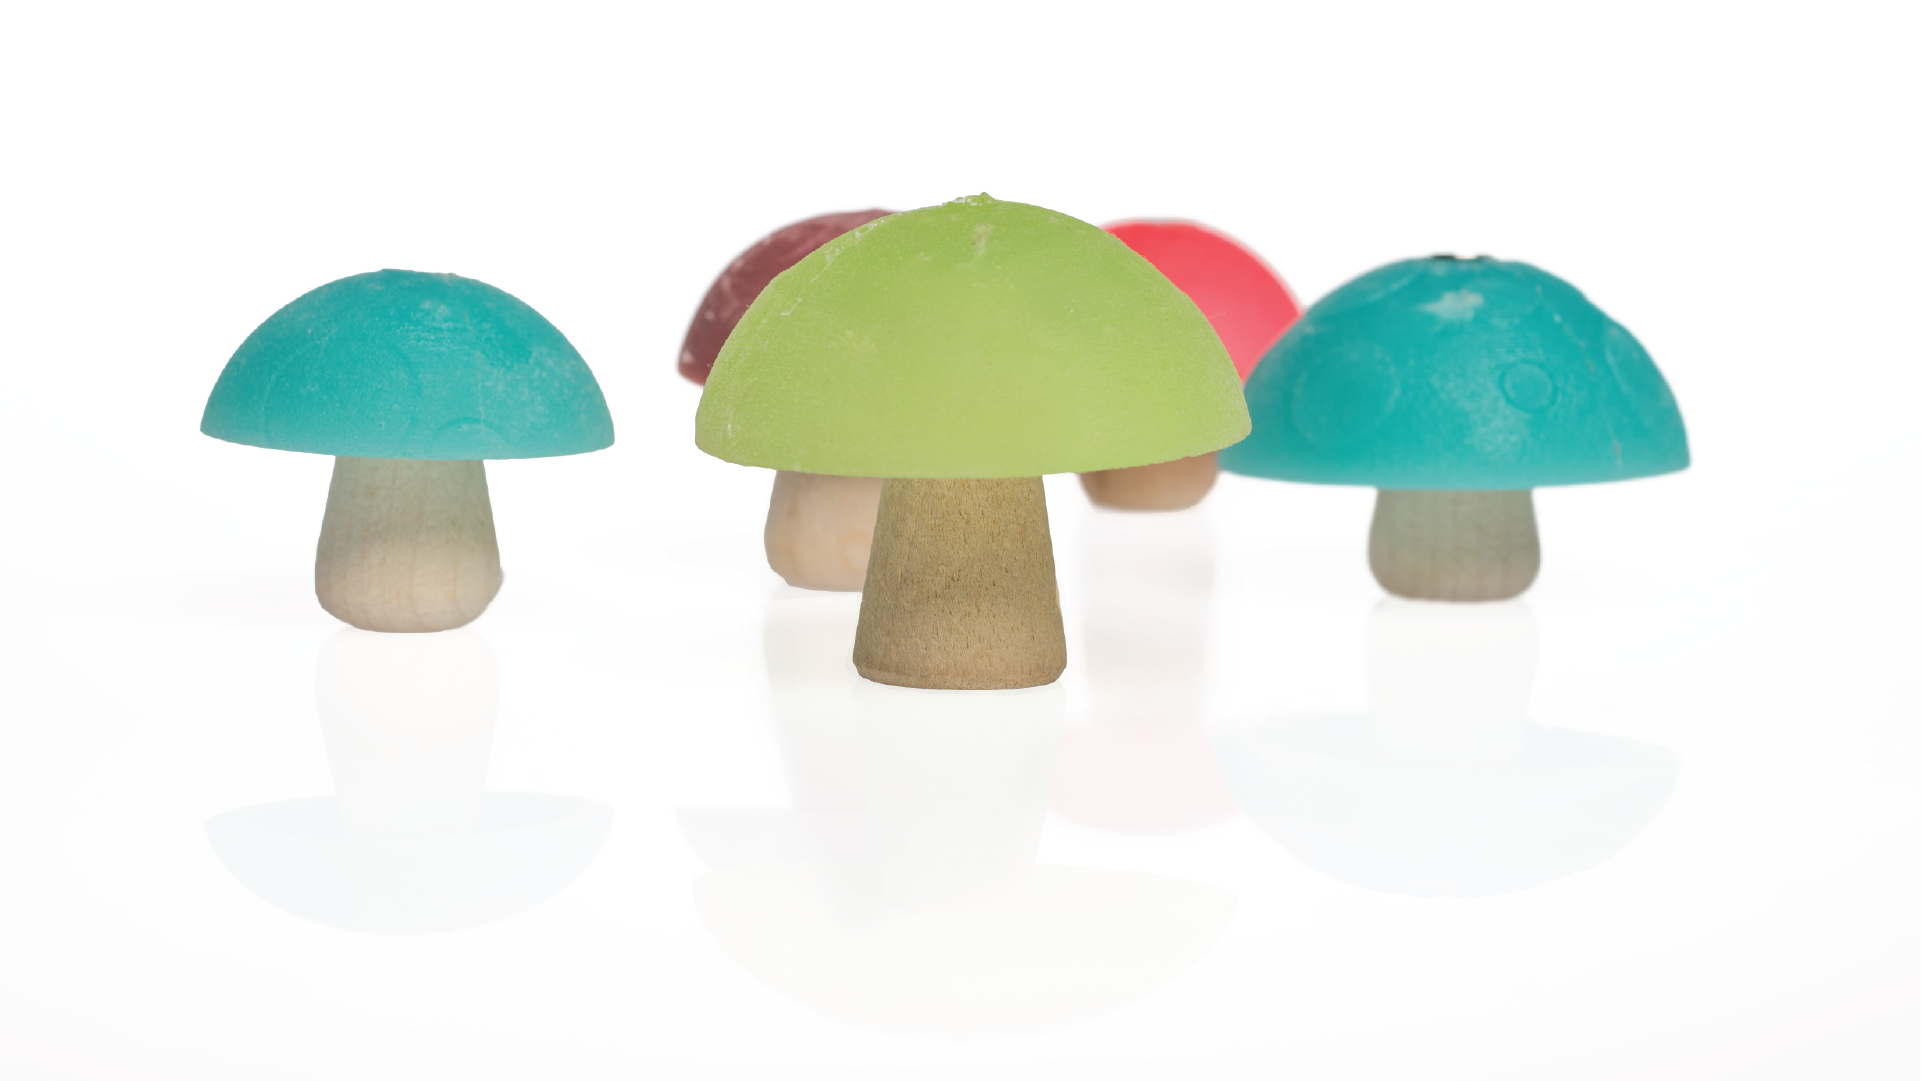 5 toys in a shape of a mushroom. The top cap is made of rubber and the stem is a simple wood conical shape.